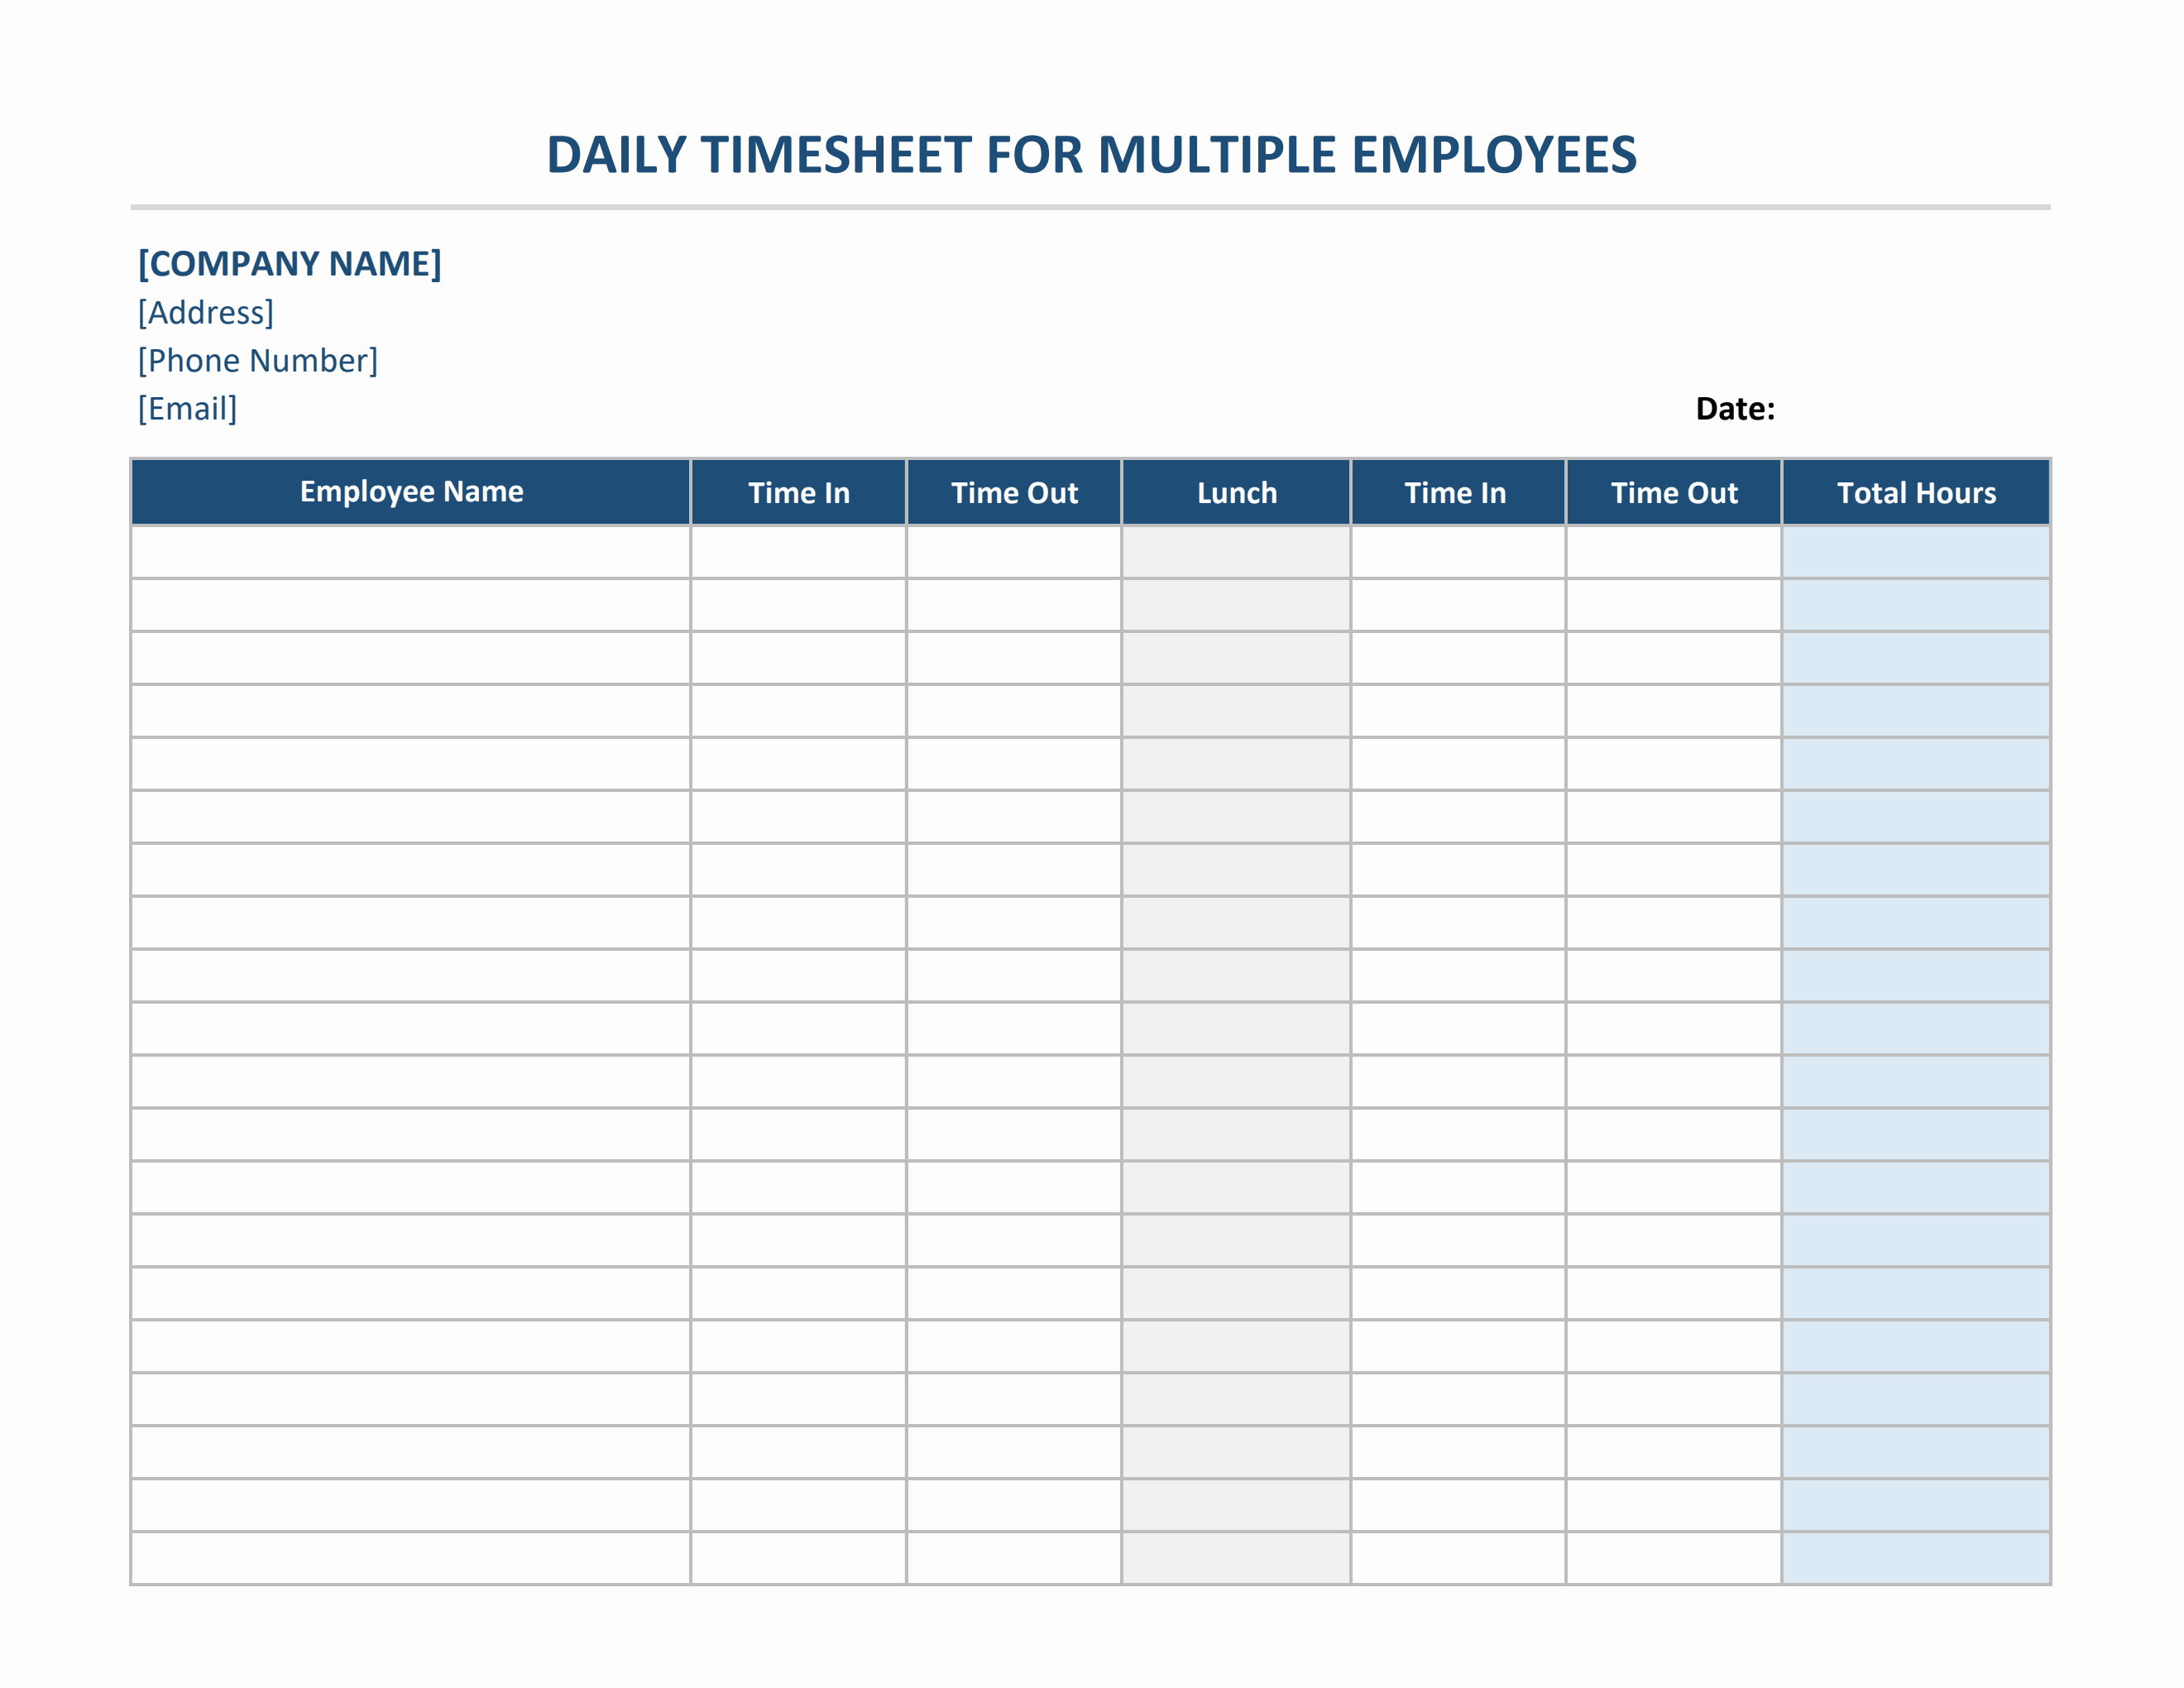 daily-timesheet-for-multiple-employees-in-excel